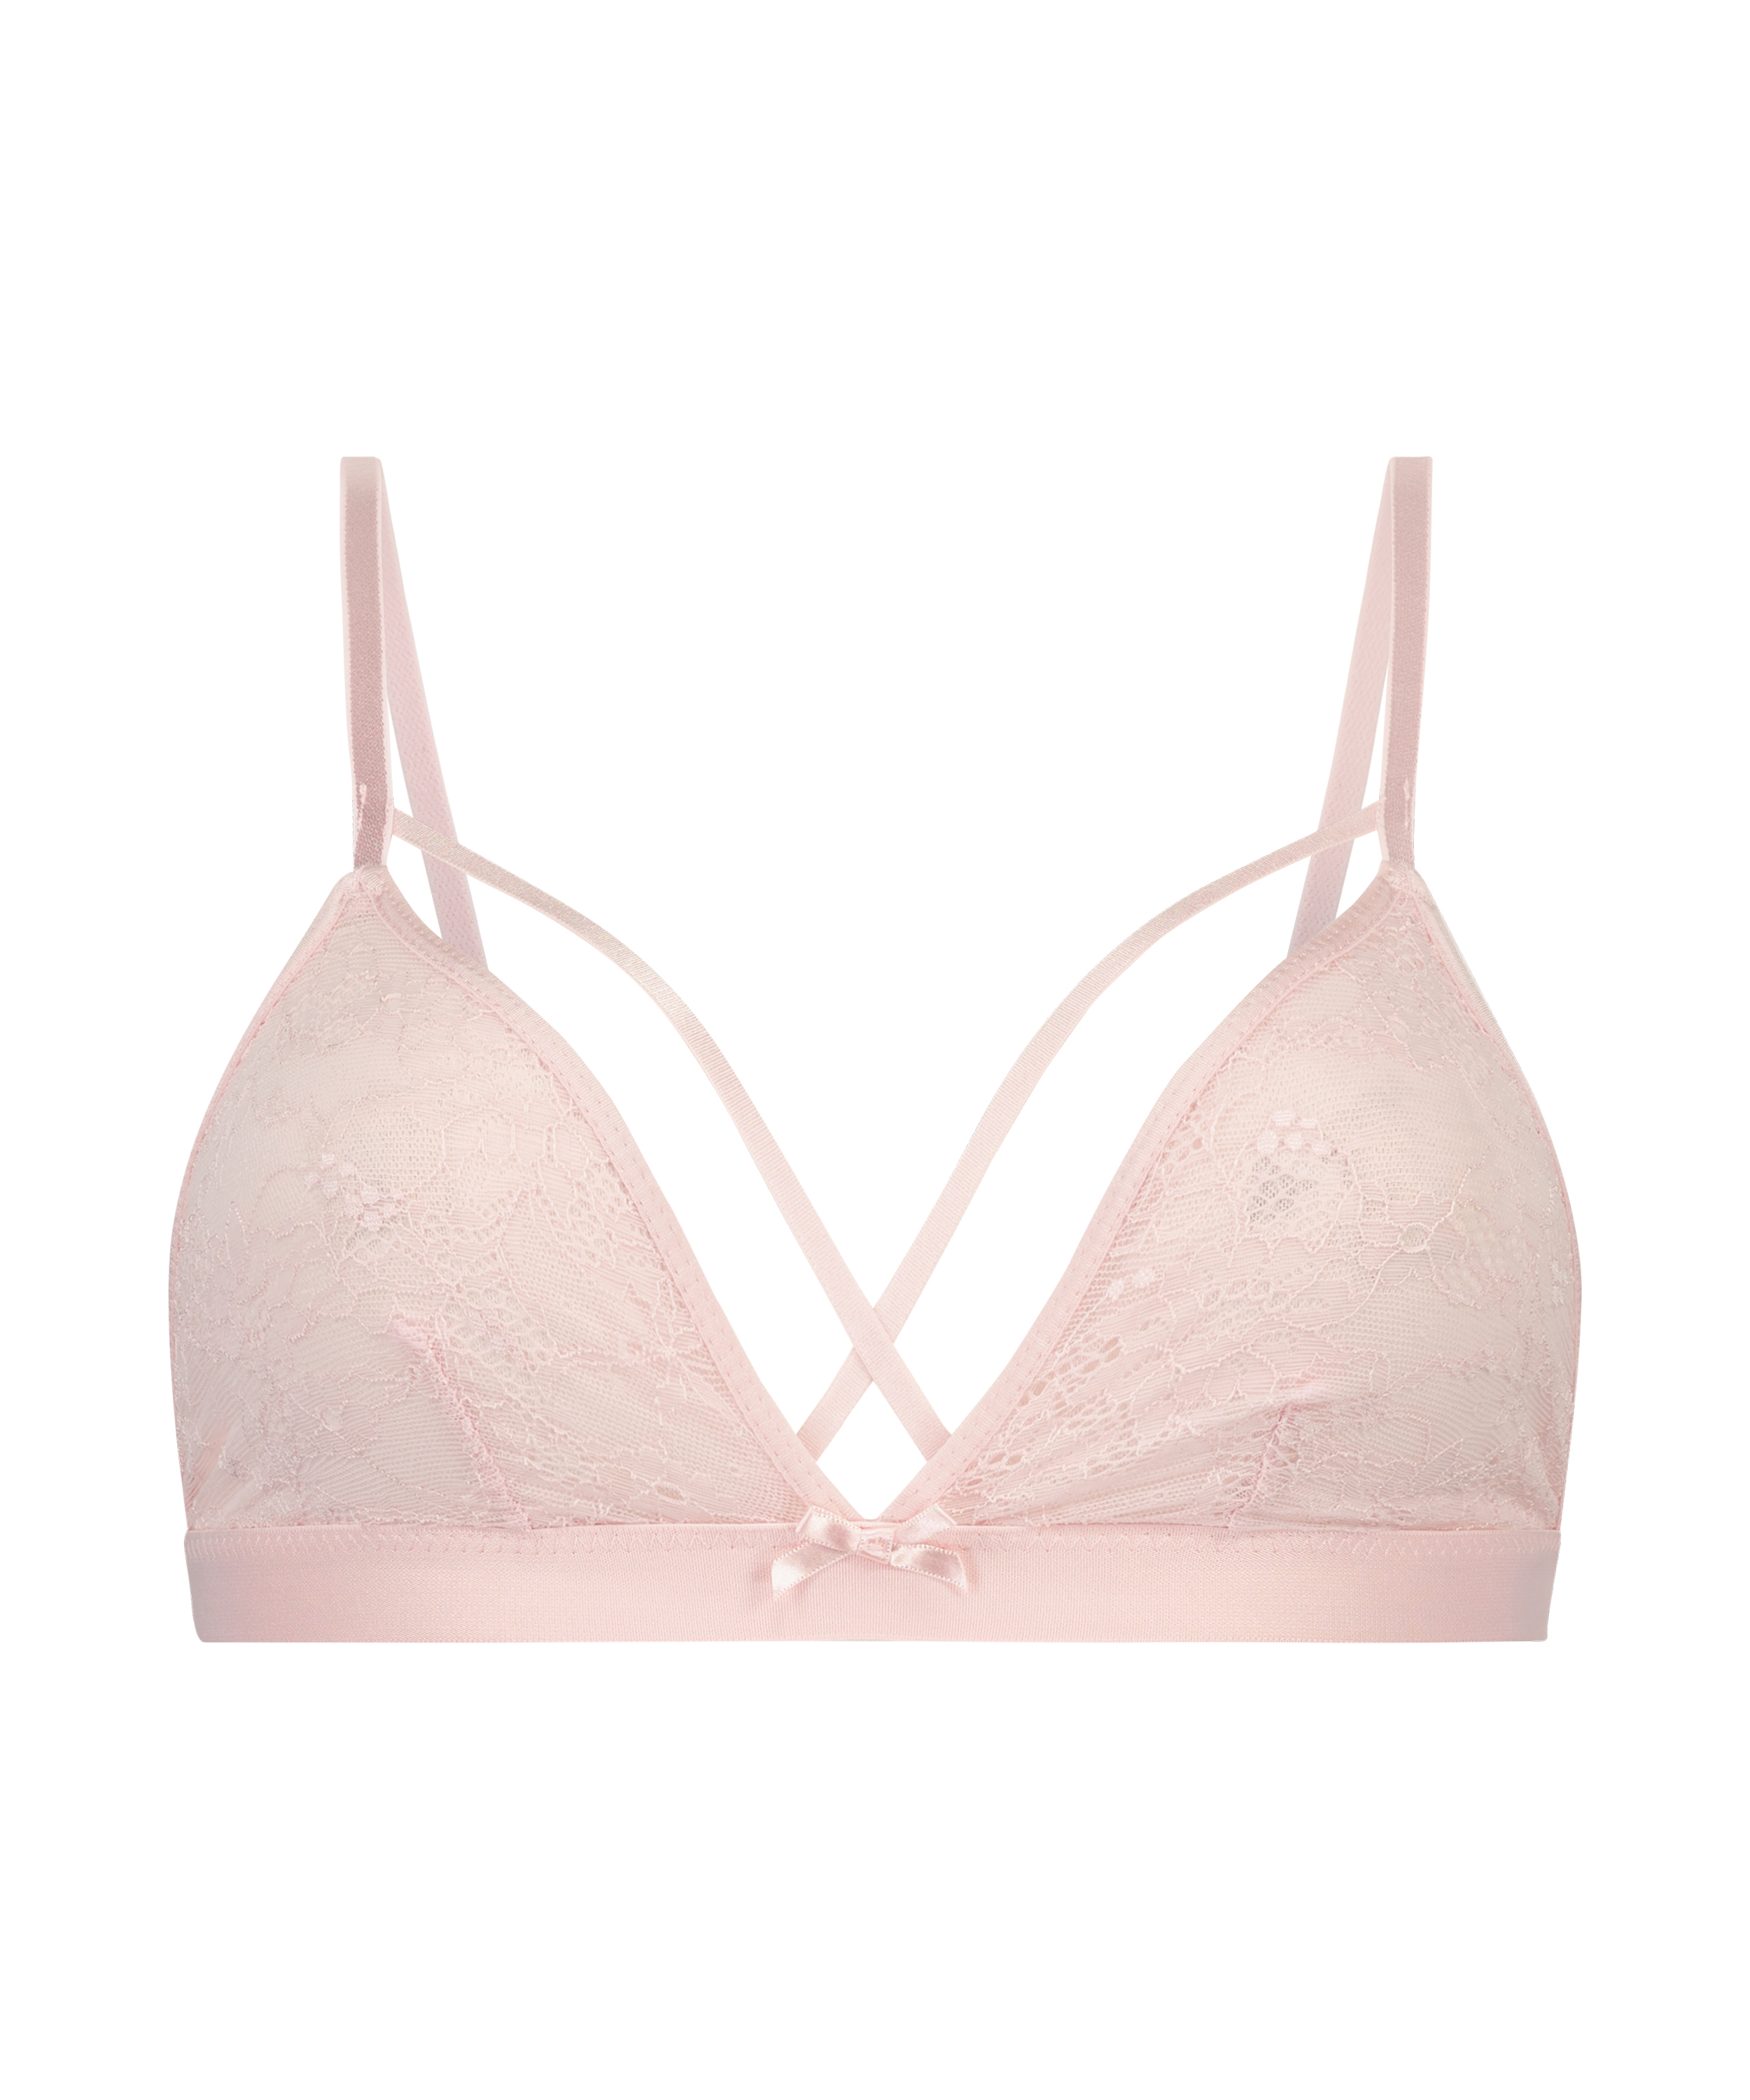 Bralette Corby, pink, main